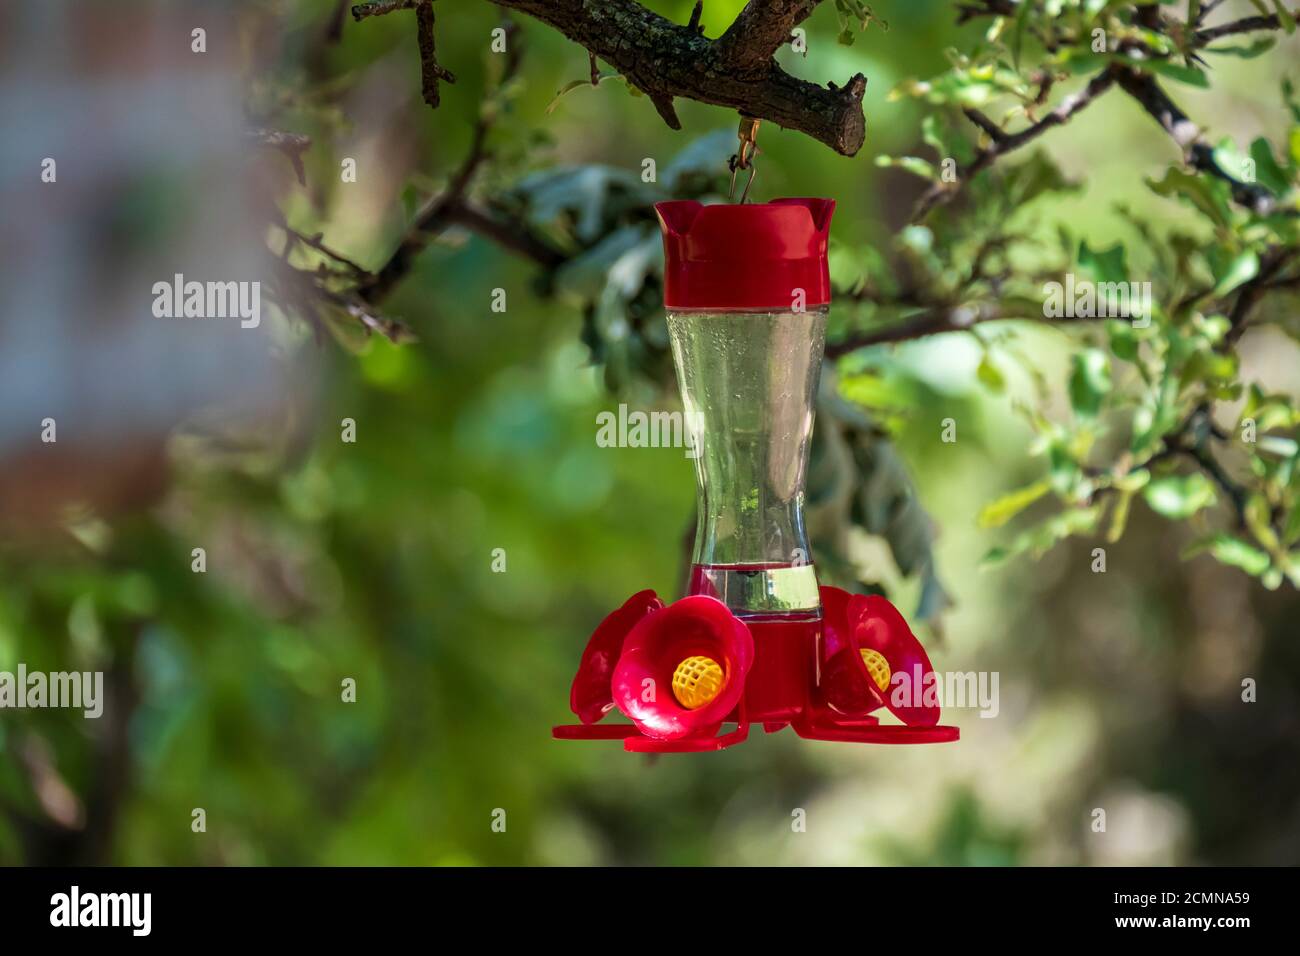 A red plastic hummingbird feeder hanging from a tree branch in the countryside. Stock Photo